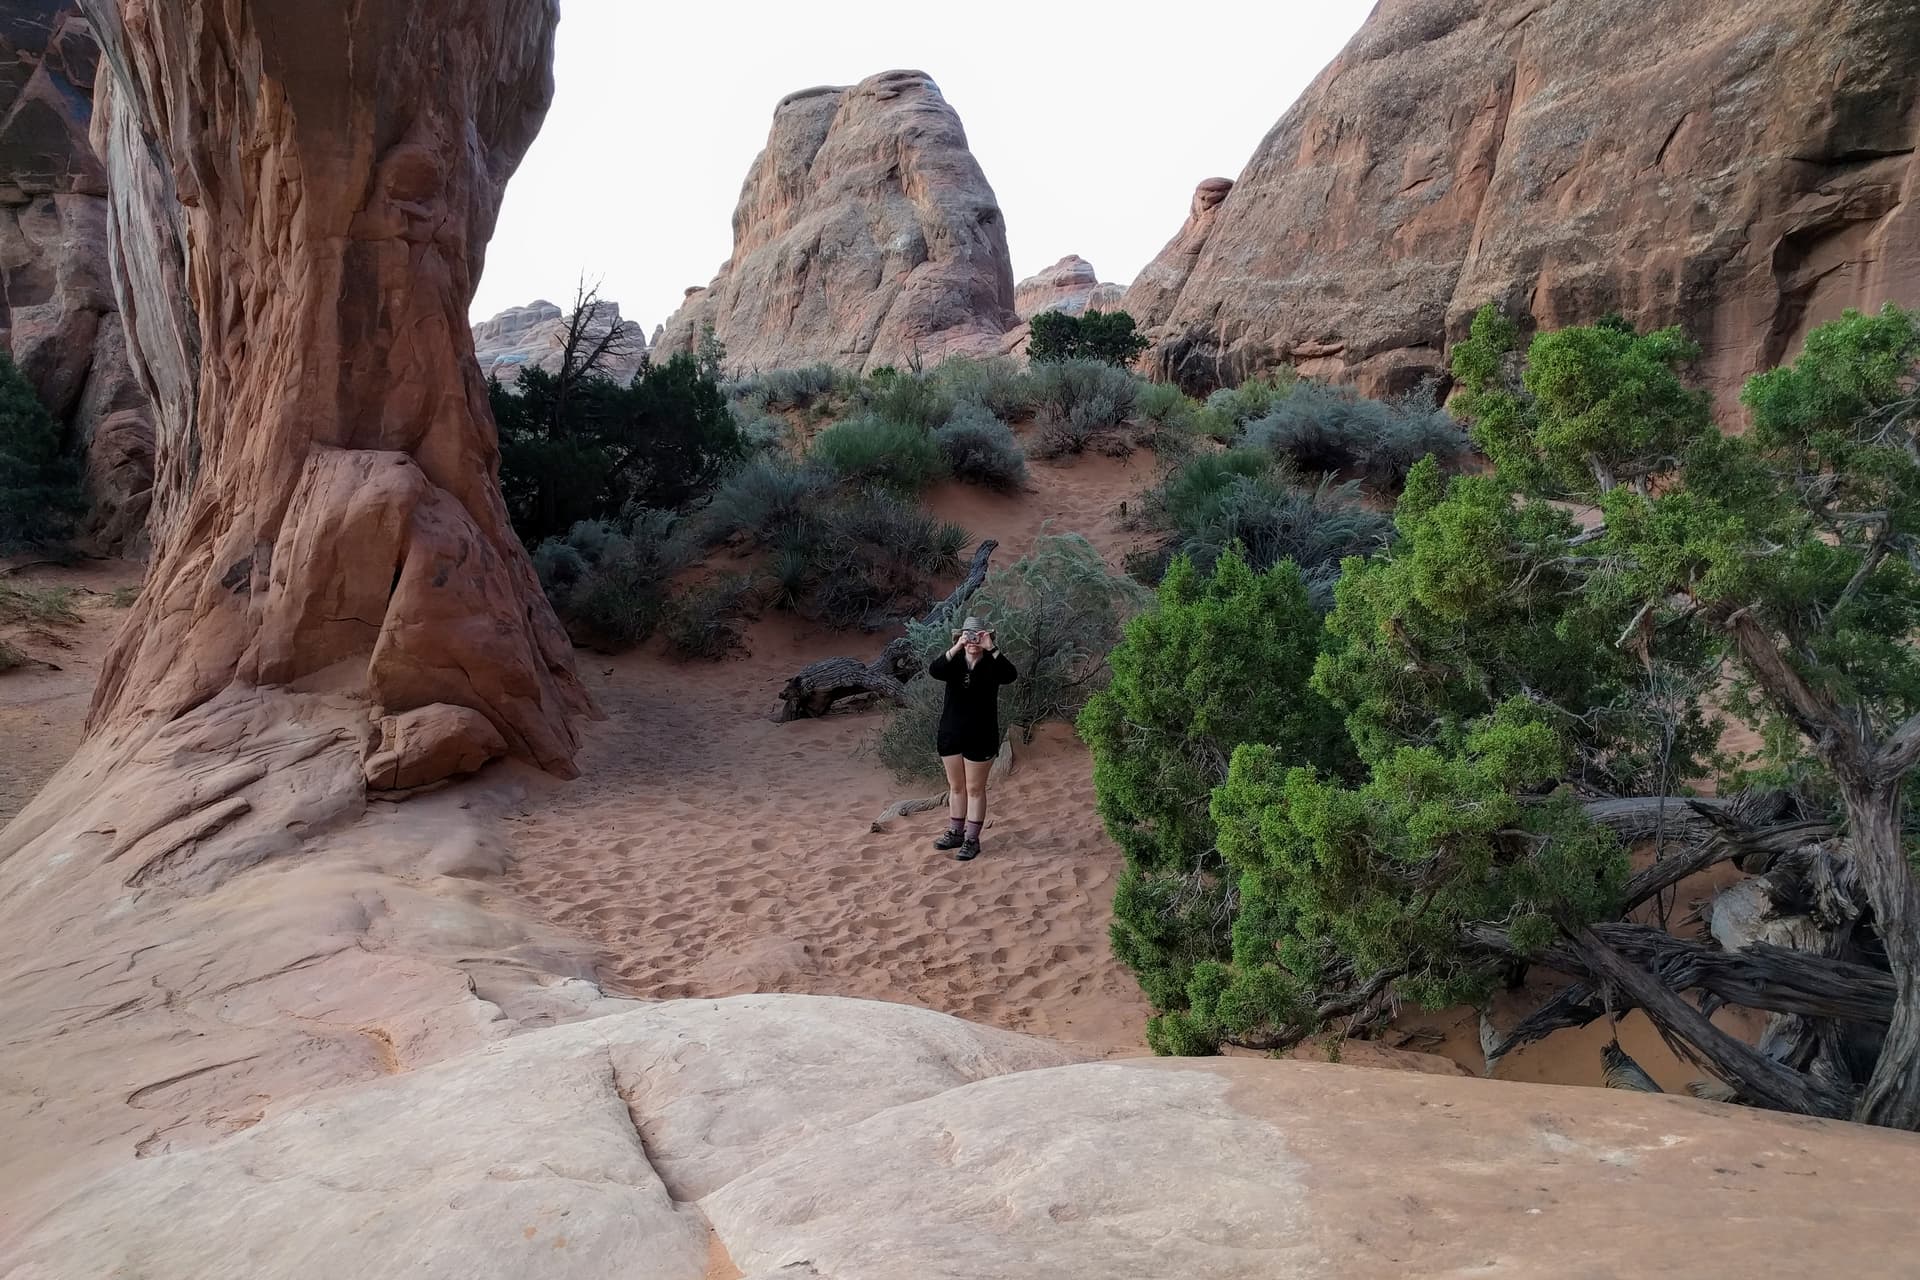 Len taking a picture of me taking a picture of her. She stands at the base of a shrub-covered dune on one side of the Pine Tree Arch, while I stand next to a Juniper tree near the middle of the arch.